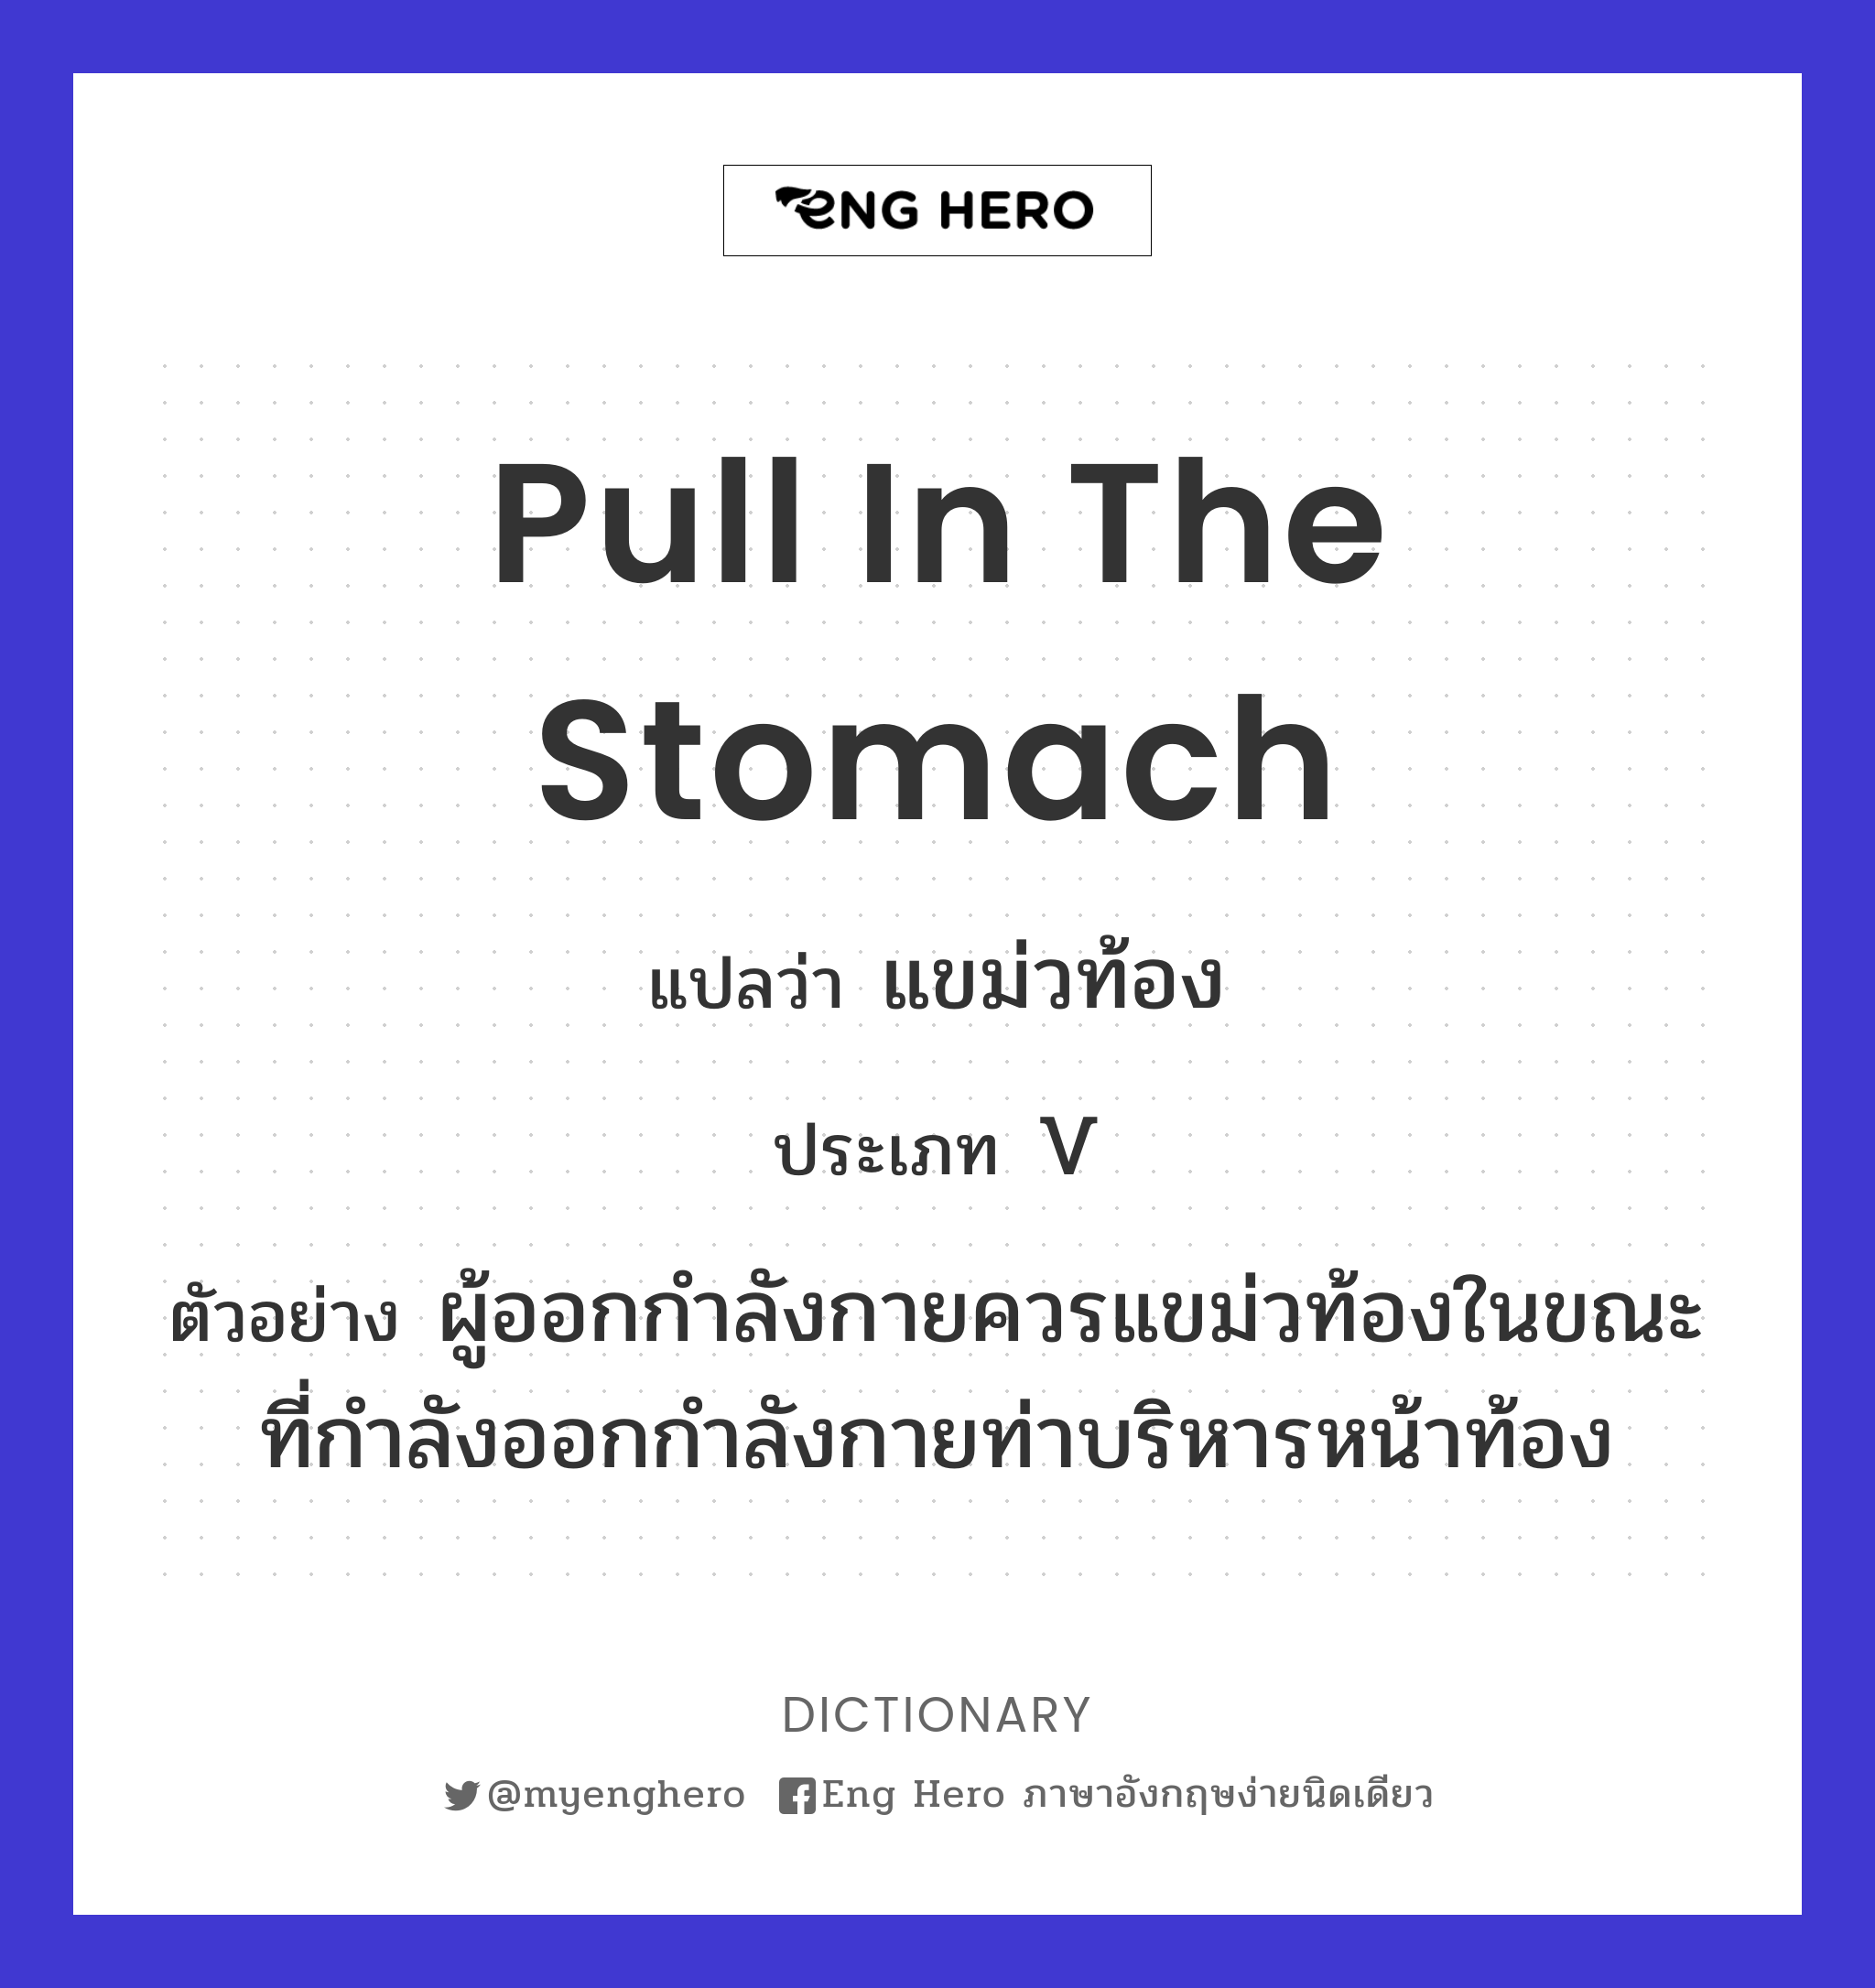 pull in the stomach